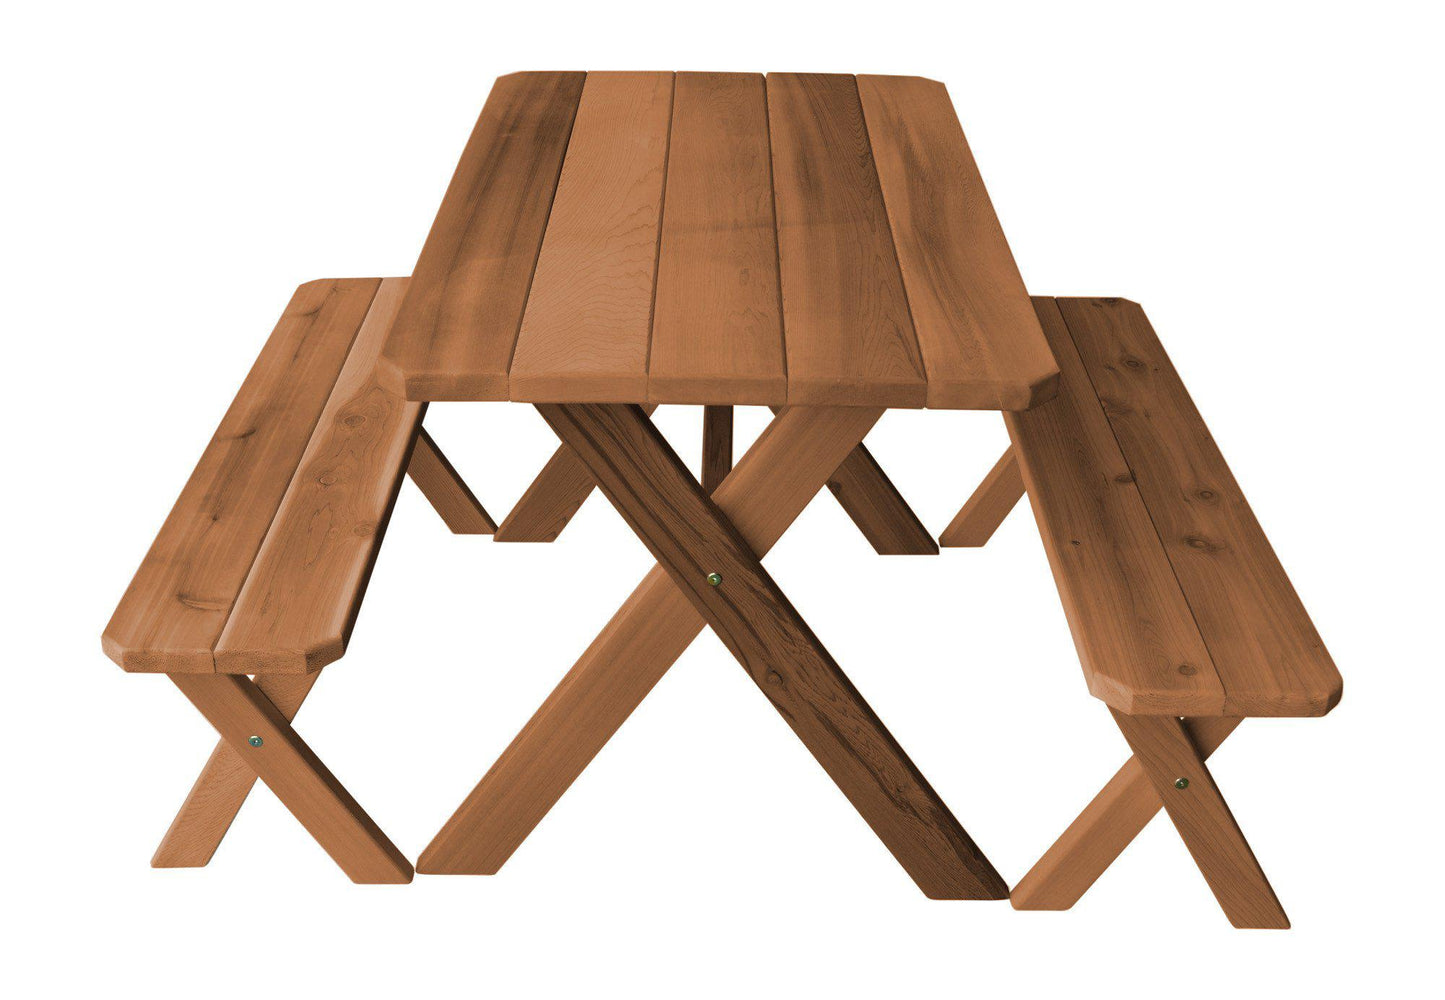 A&L FURNITURE CO. Western Red Cedar 4' Cross-leg Table w/2 Benches - Specify for FREE 2" Umbrella Hole - LEAD TIME TO SHIP 2 WEEKS